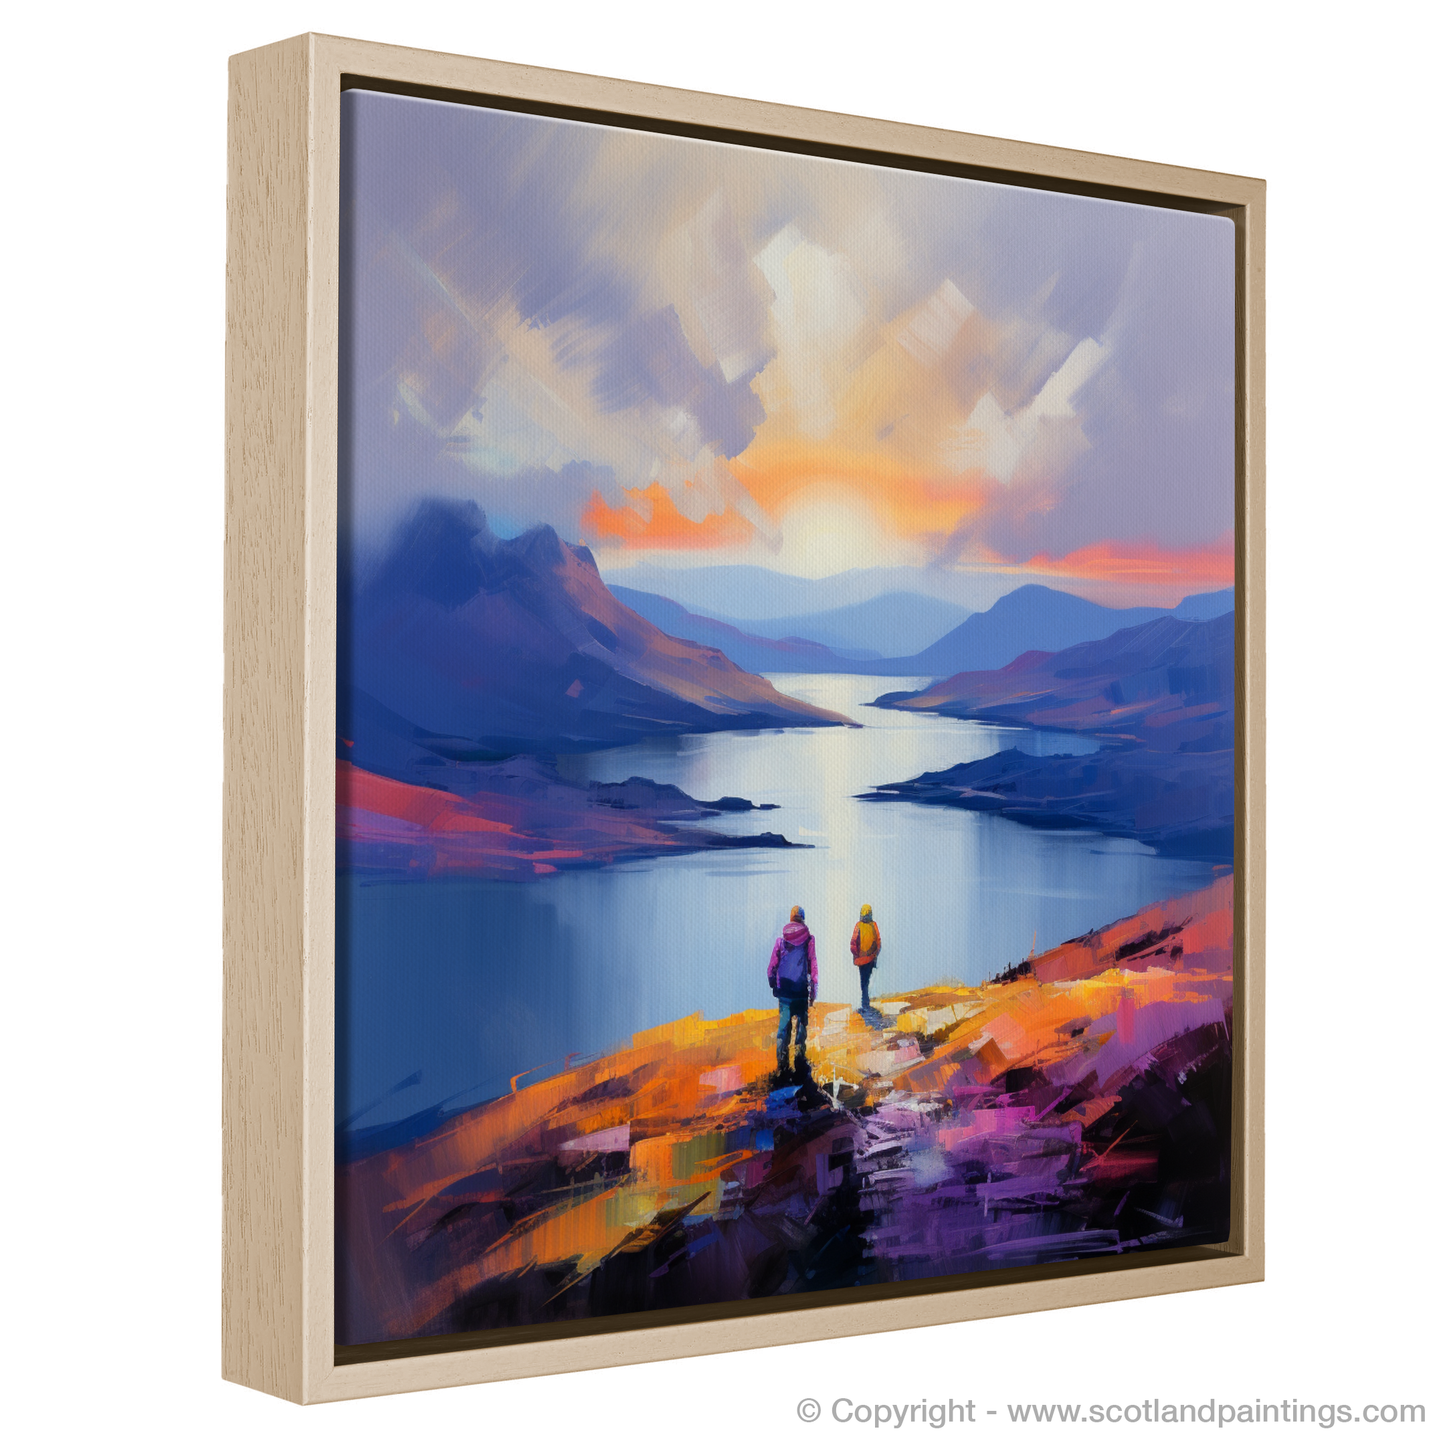 Painting and Art Print of Two hikers looking out on Loch Lomond entitled "Sunset Serenade at Loch Lomond".